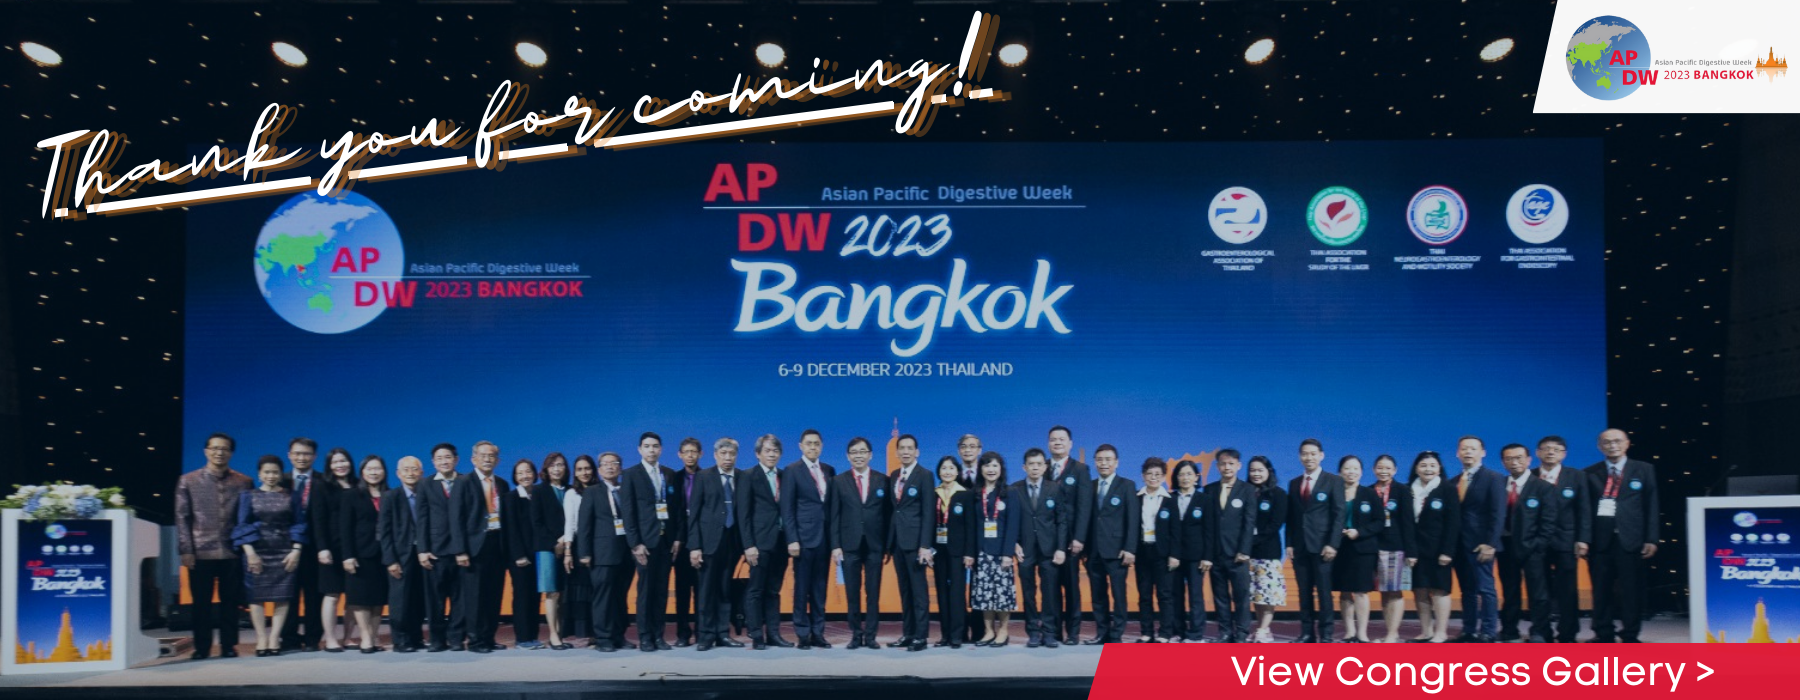  Thank you for attending APDW 2023